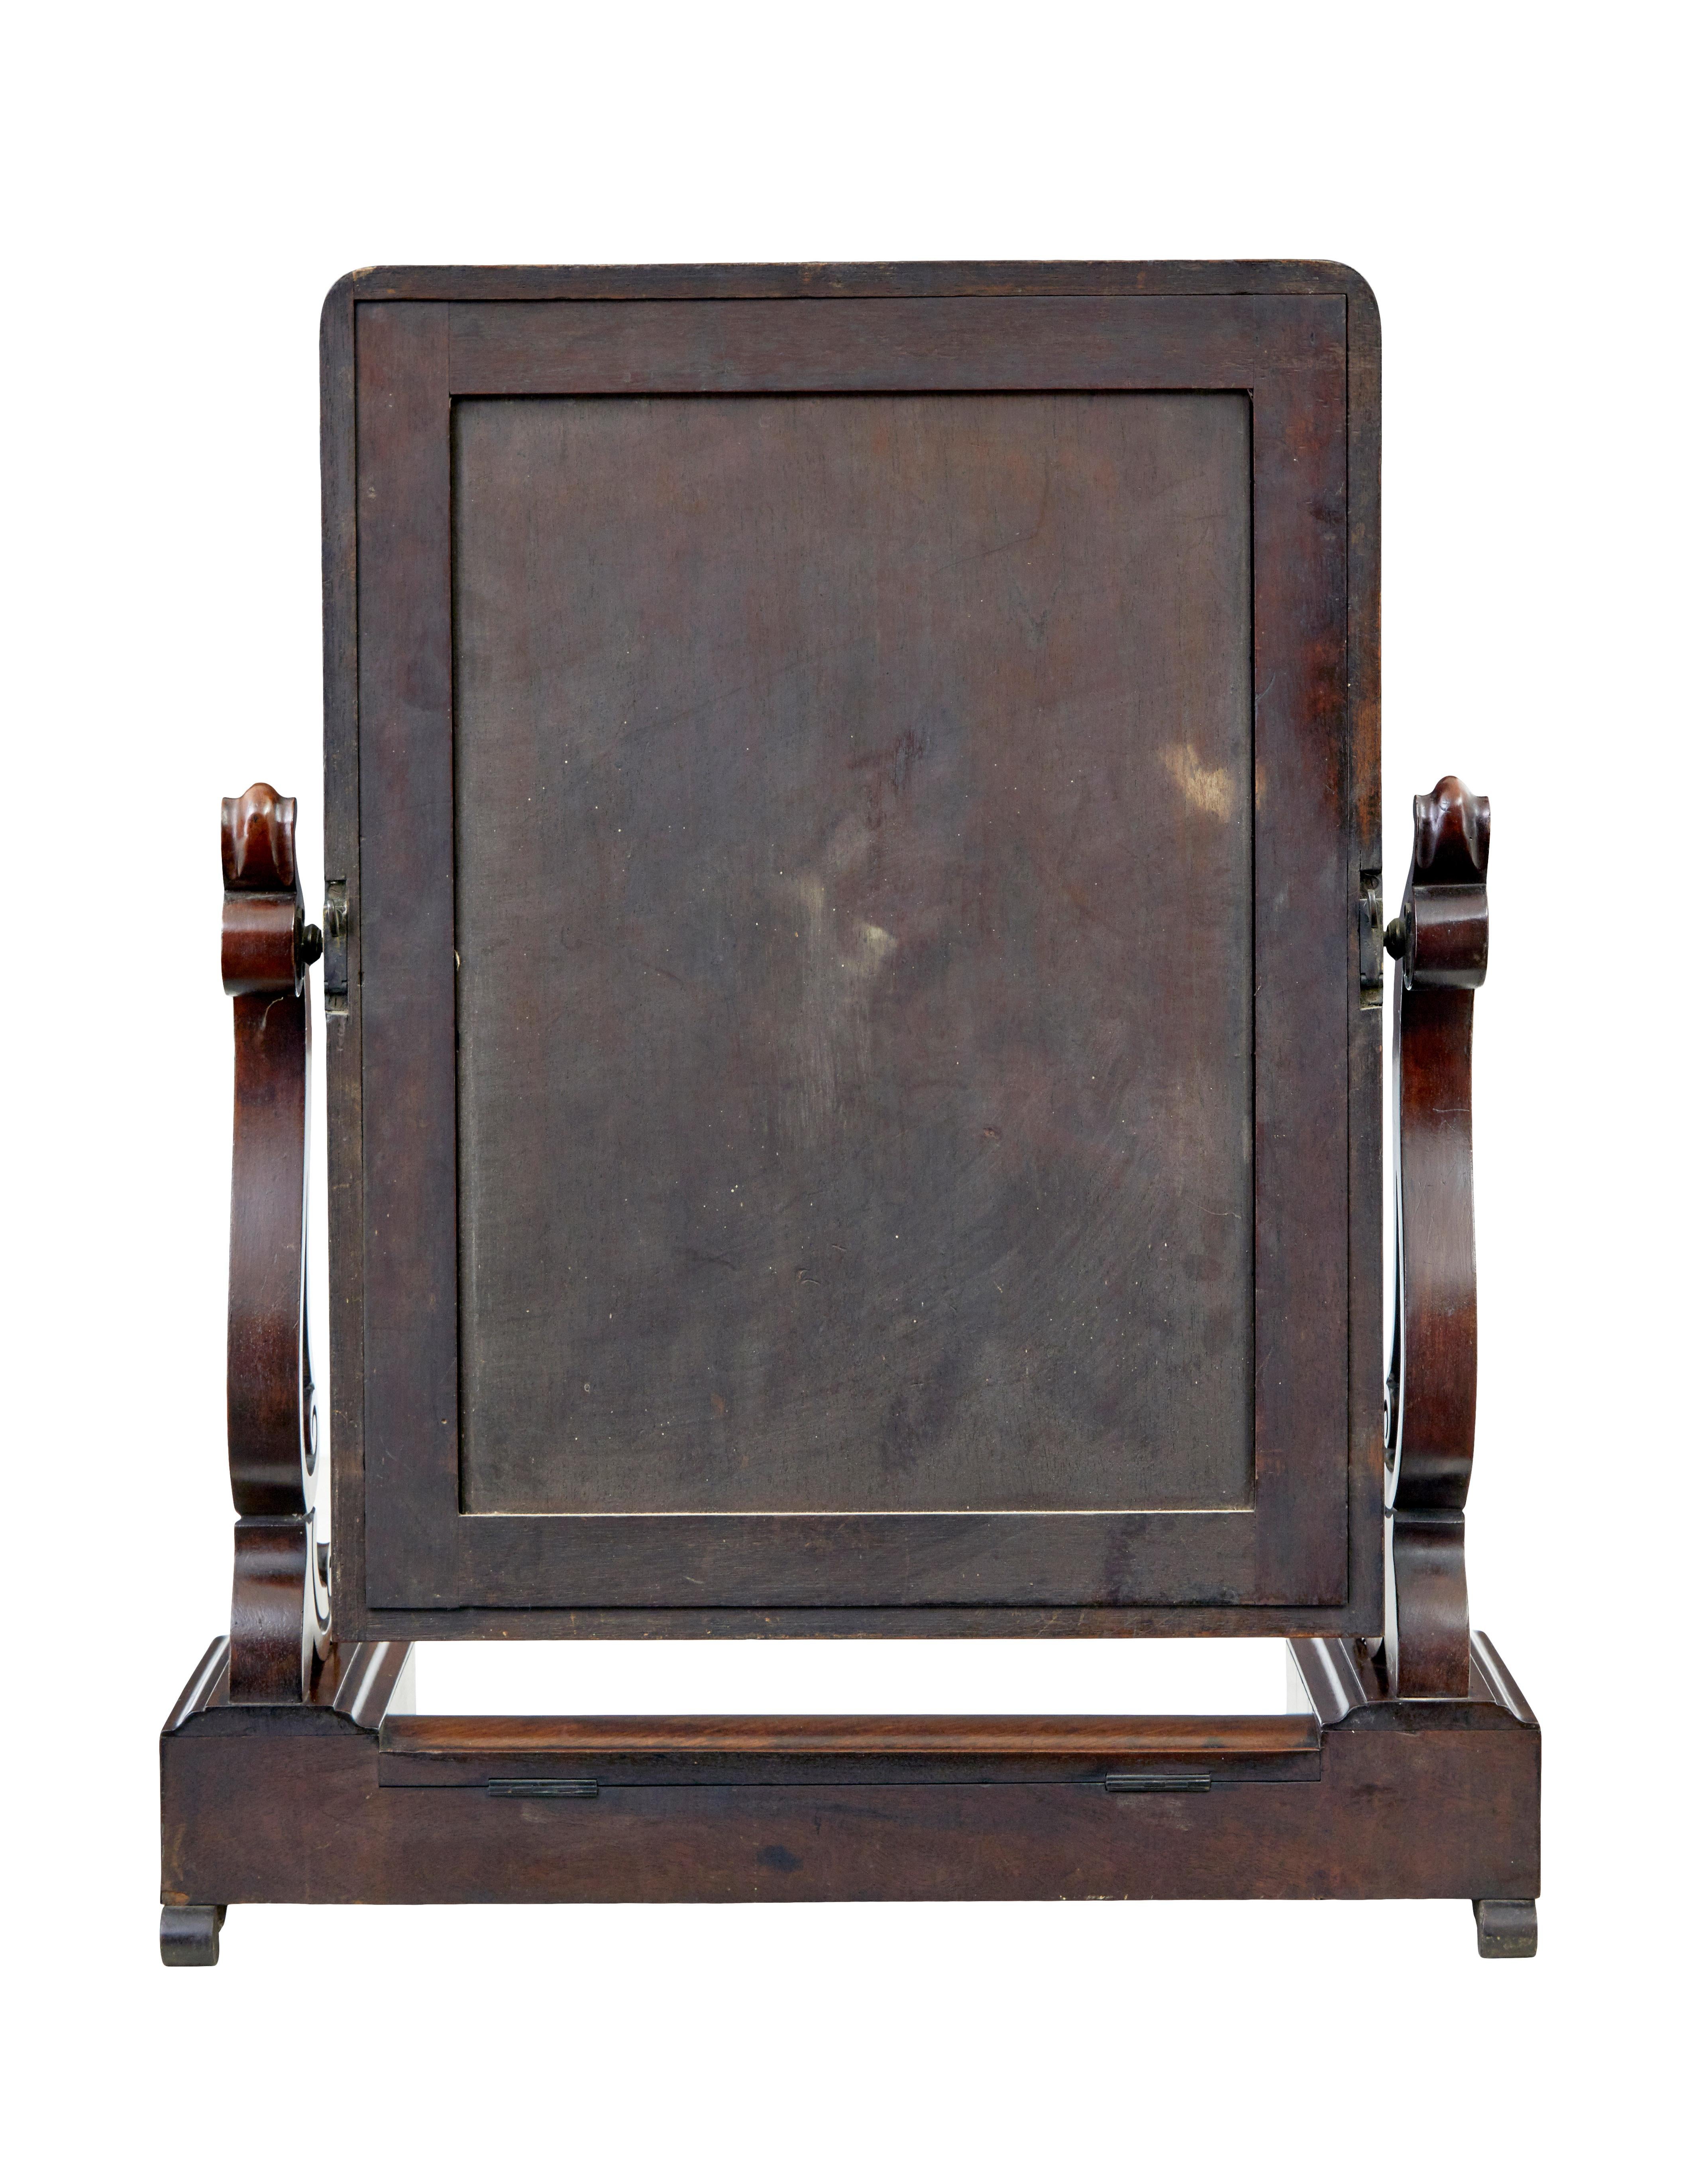 Early Victorian 19th century early Victorian mahogany vanity mirror For Sale